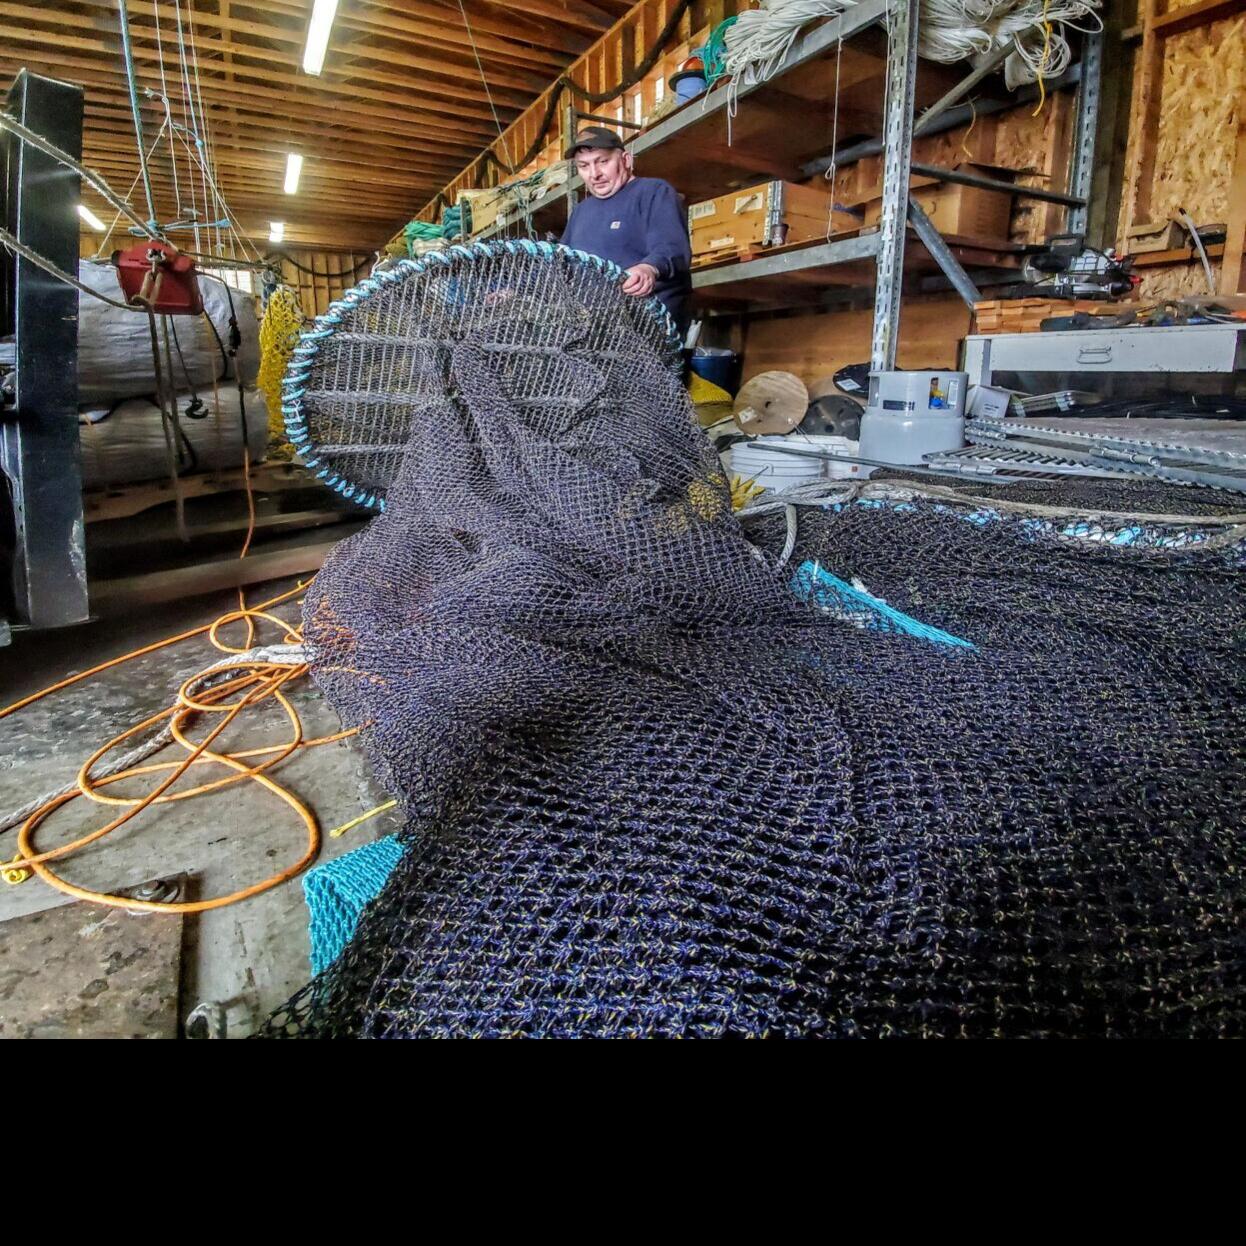 Making fishing nets is collaboration of craft and science